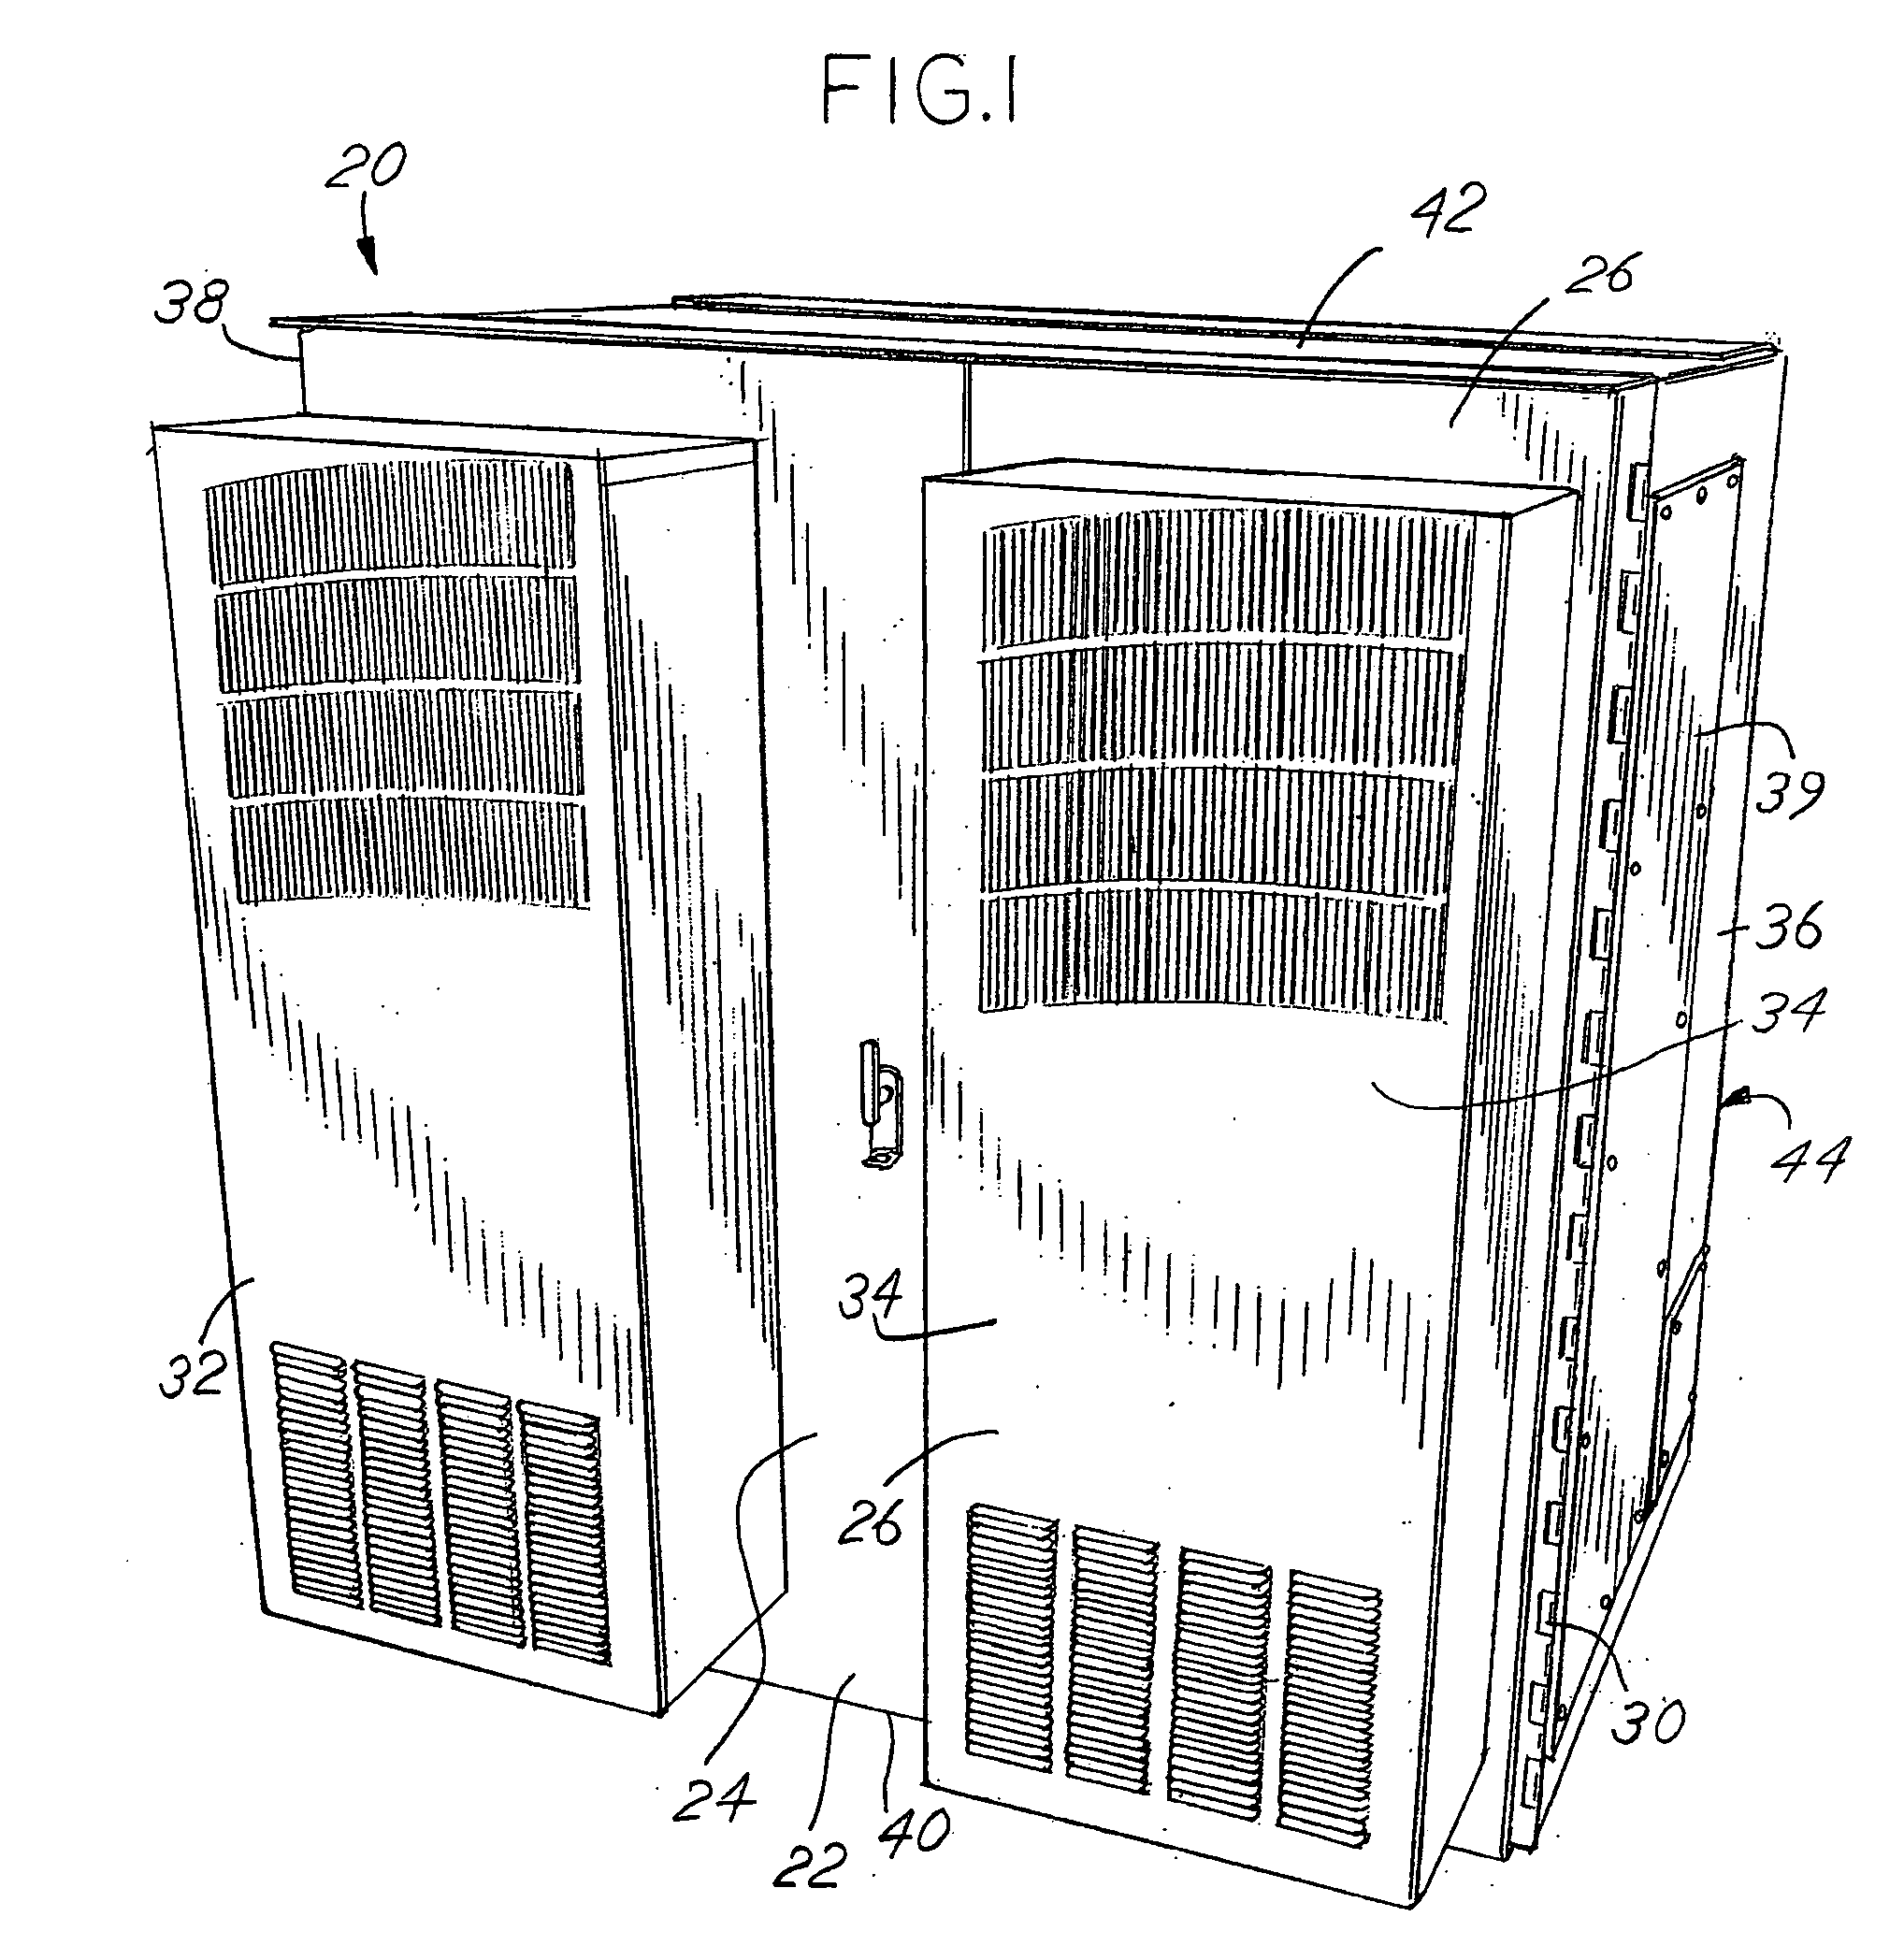 Enclosure for Electronic Equipment